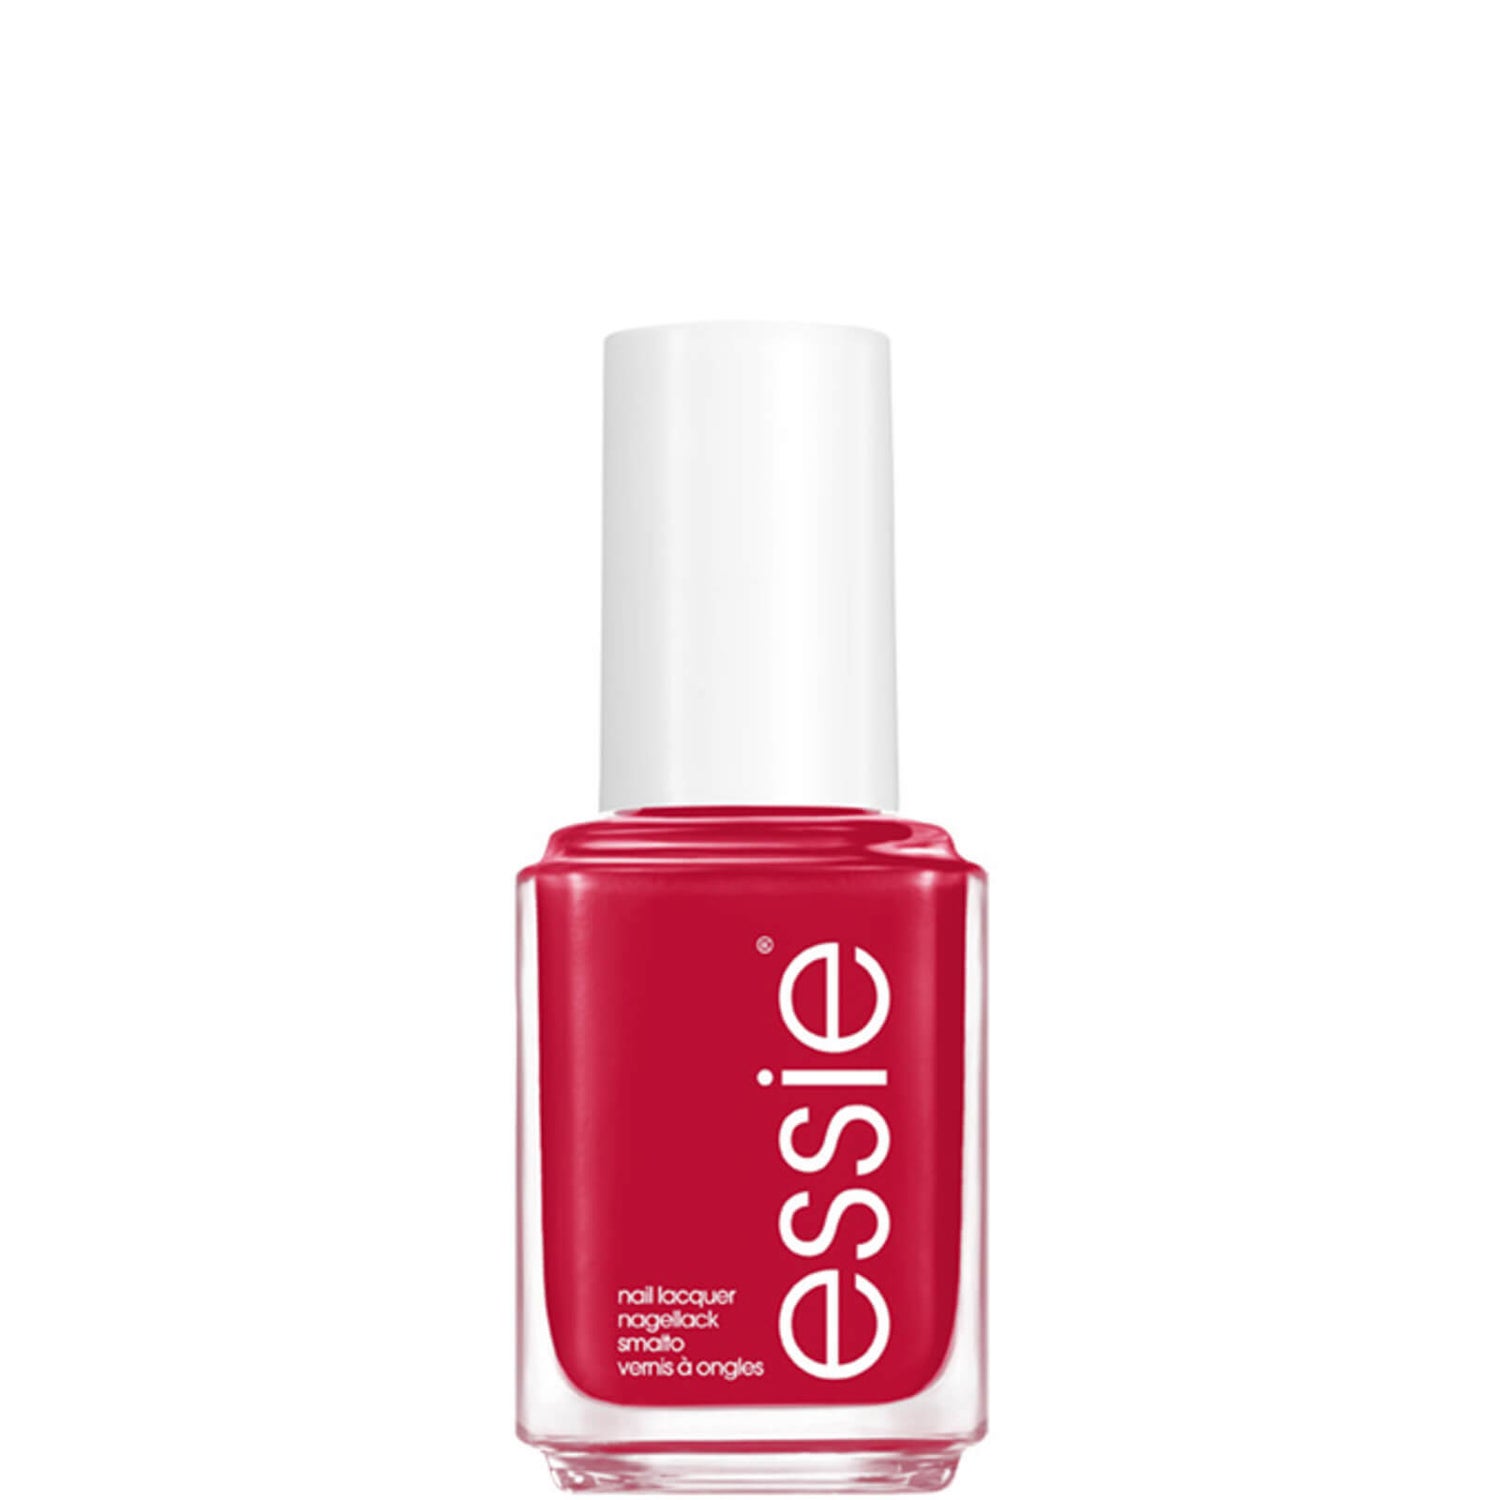 essie Nail Polish - 771 Been There London That 13.5ml - LOOKFANTASTIC